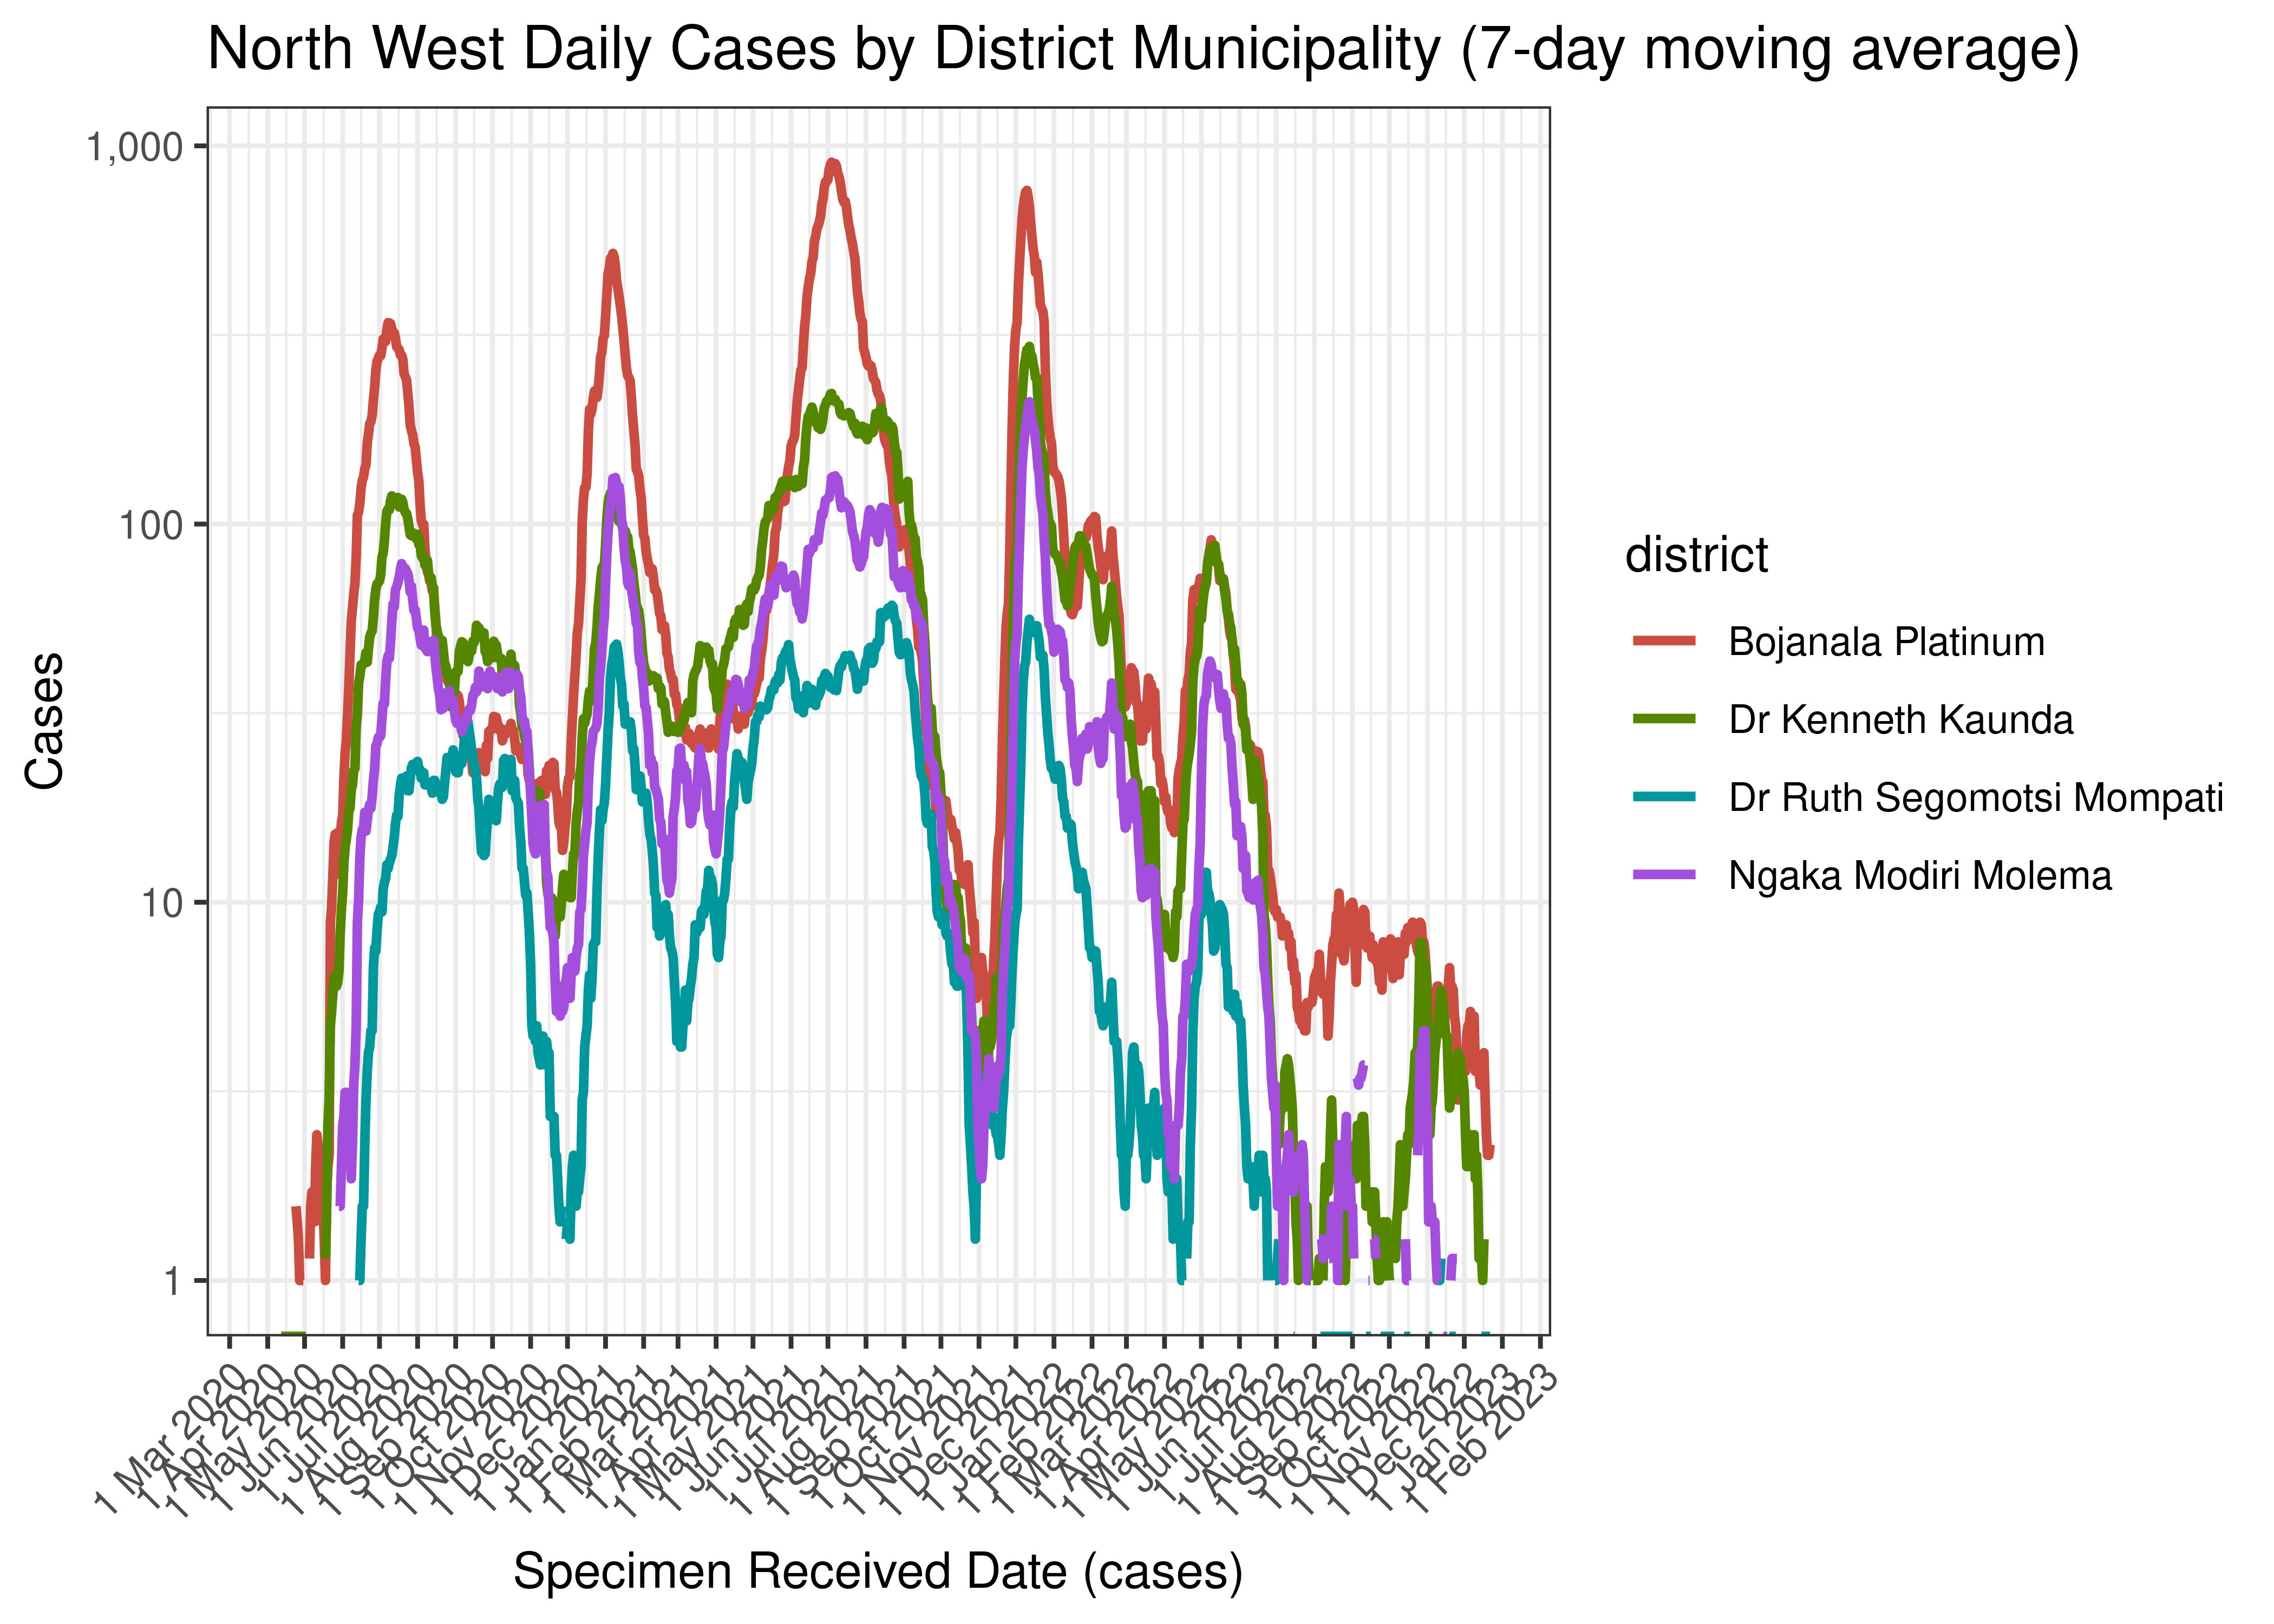 North West Daily Cases by District Municipality (7-day moving average)